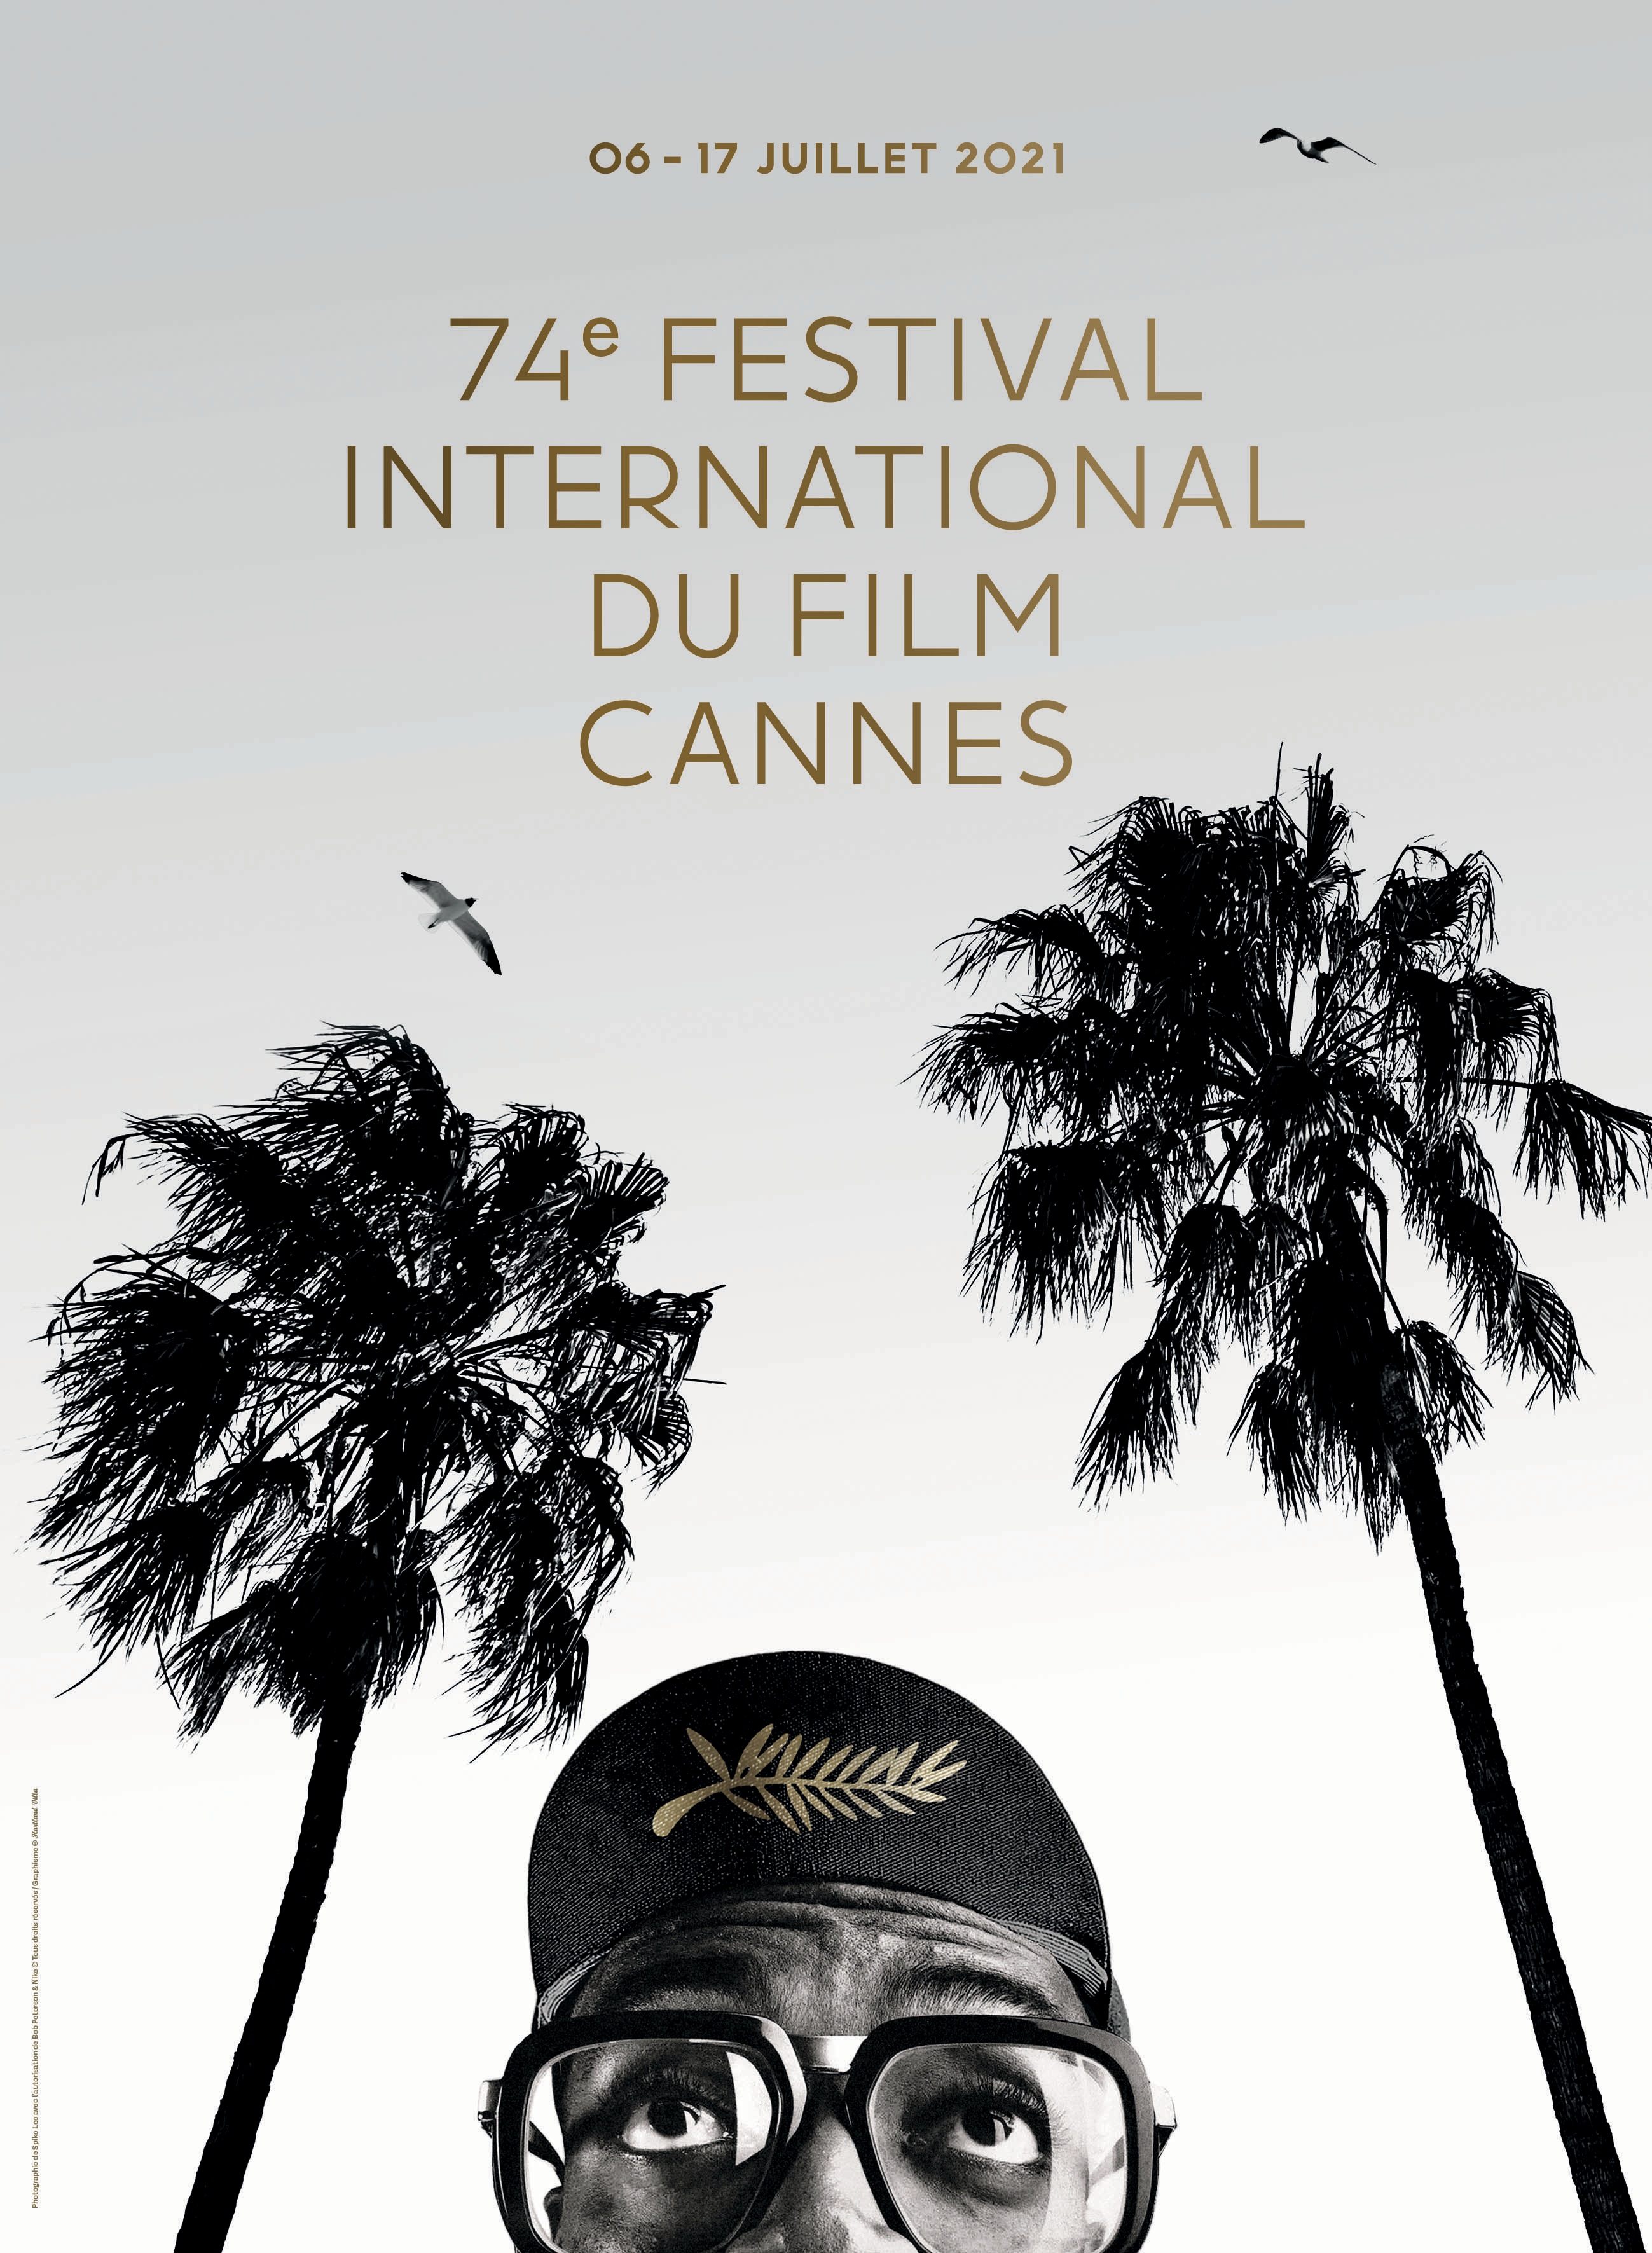 A poster from Cannes featuring Spike Lee.